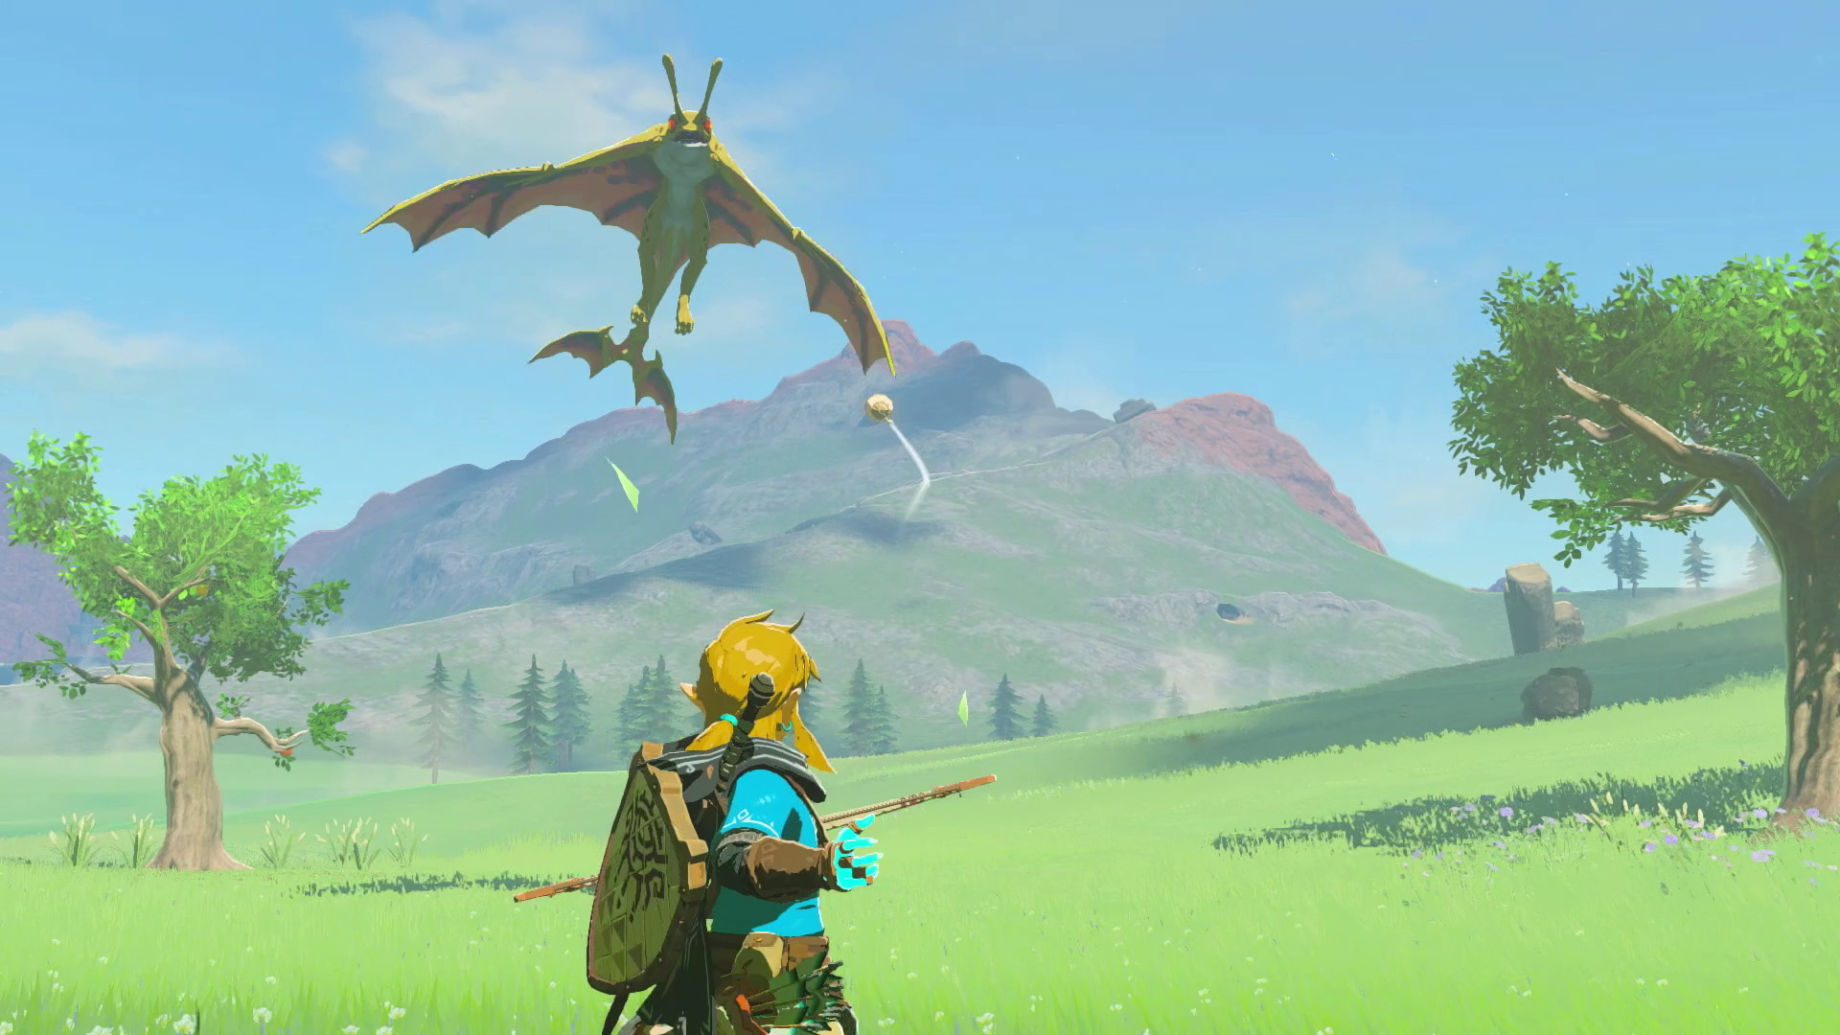 video game characters, The Legend of Zelda, The Legend of Zelda: Breath of the  Wild, cemu, screen shot, video game art, fire, trees, grass, sky, wands